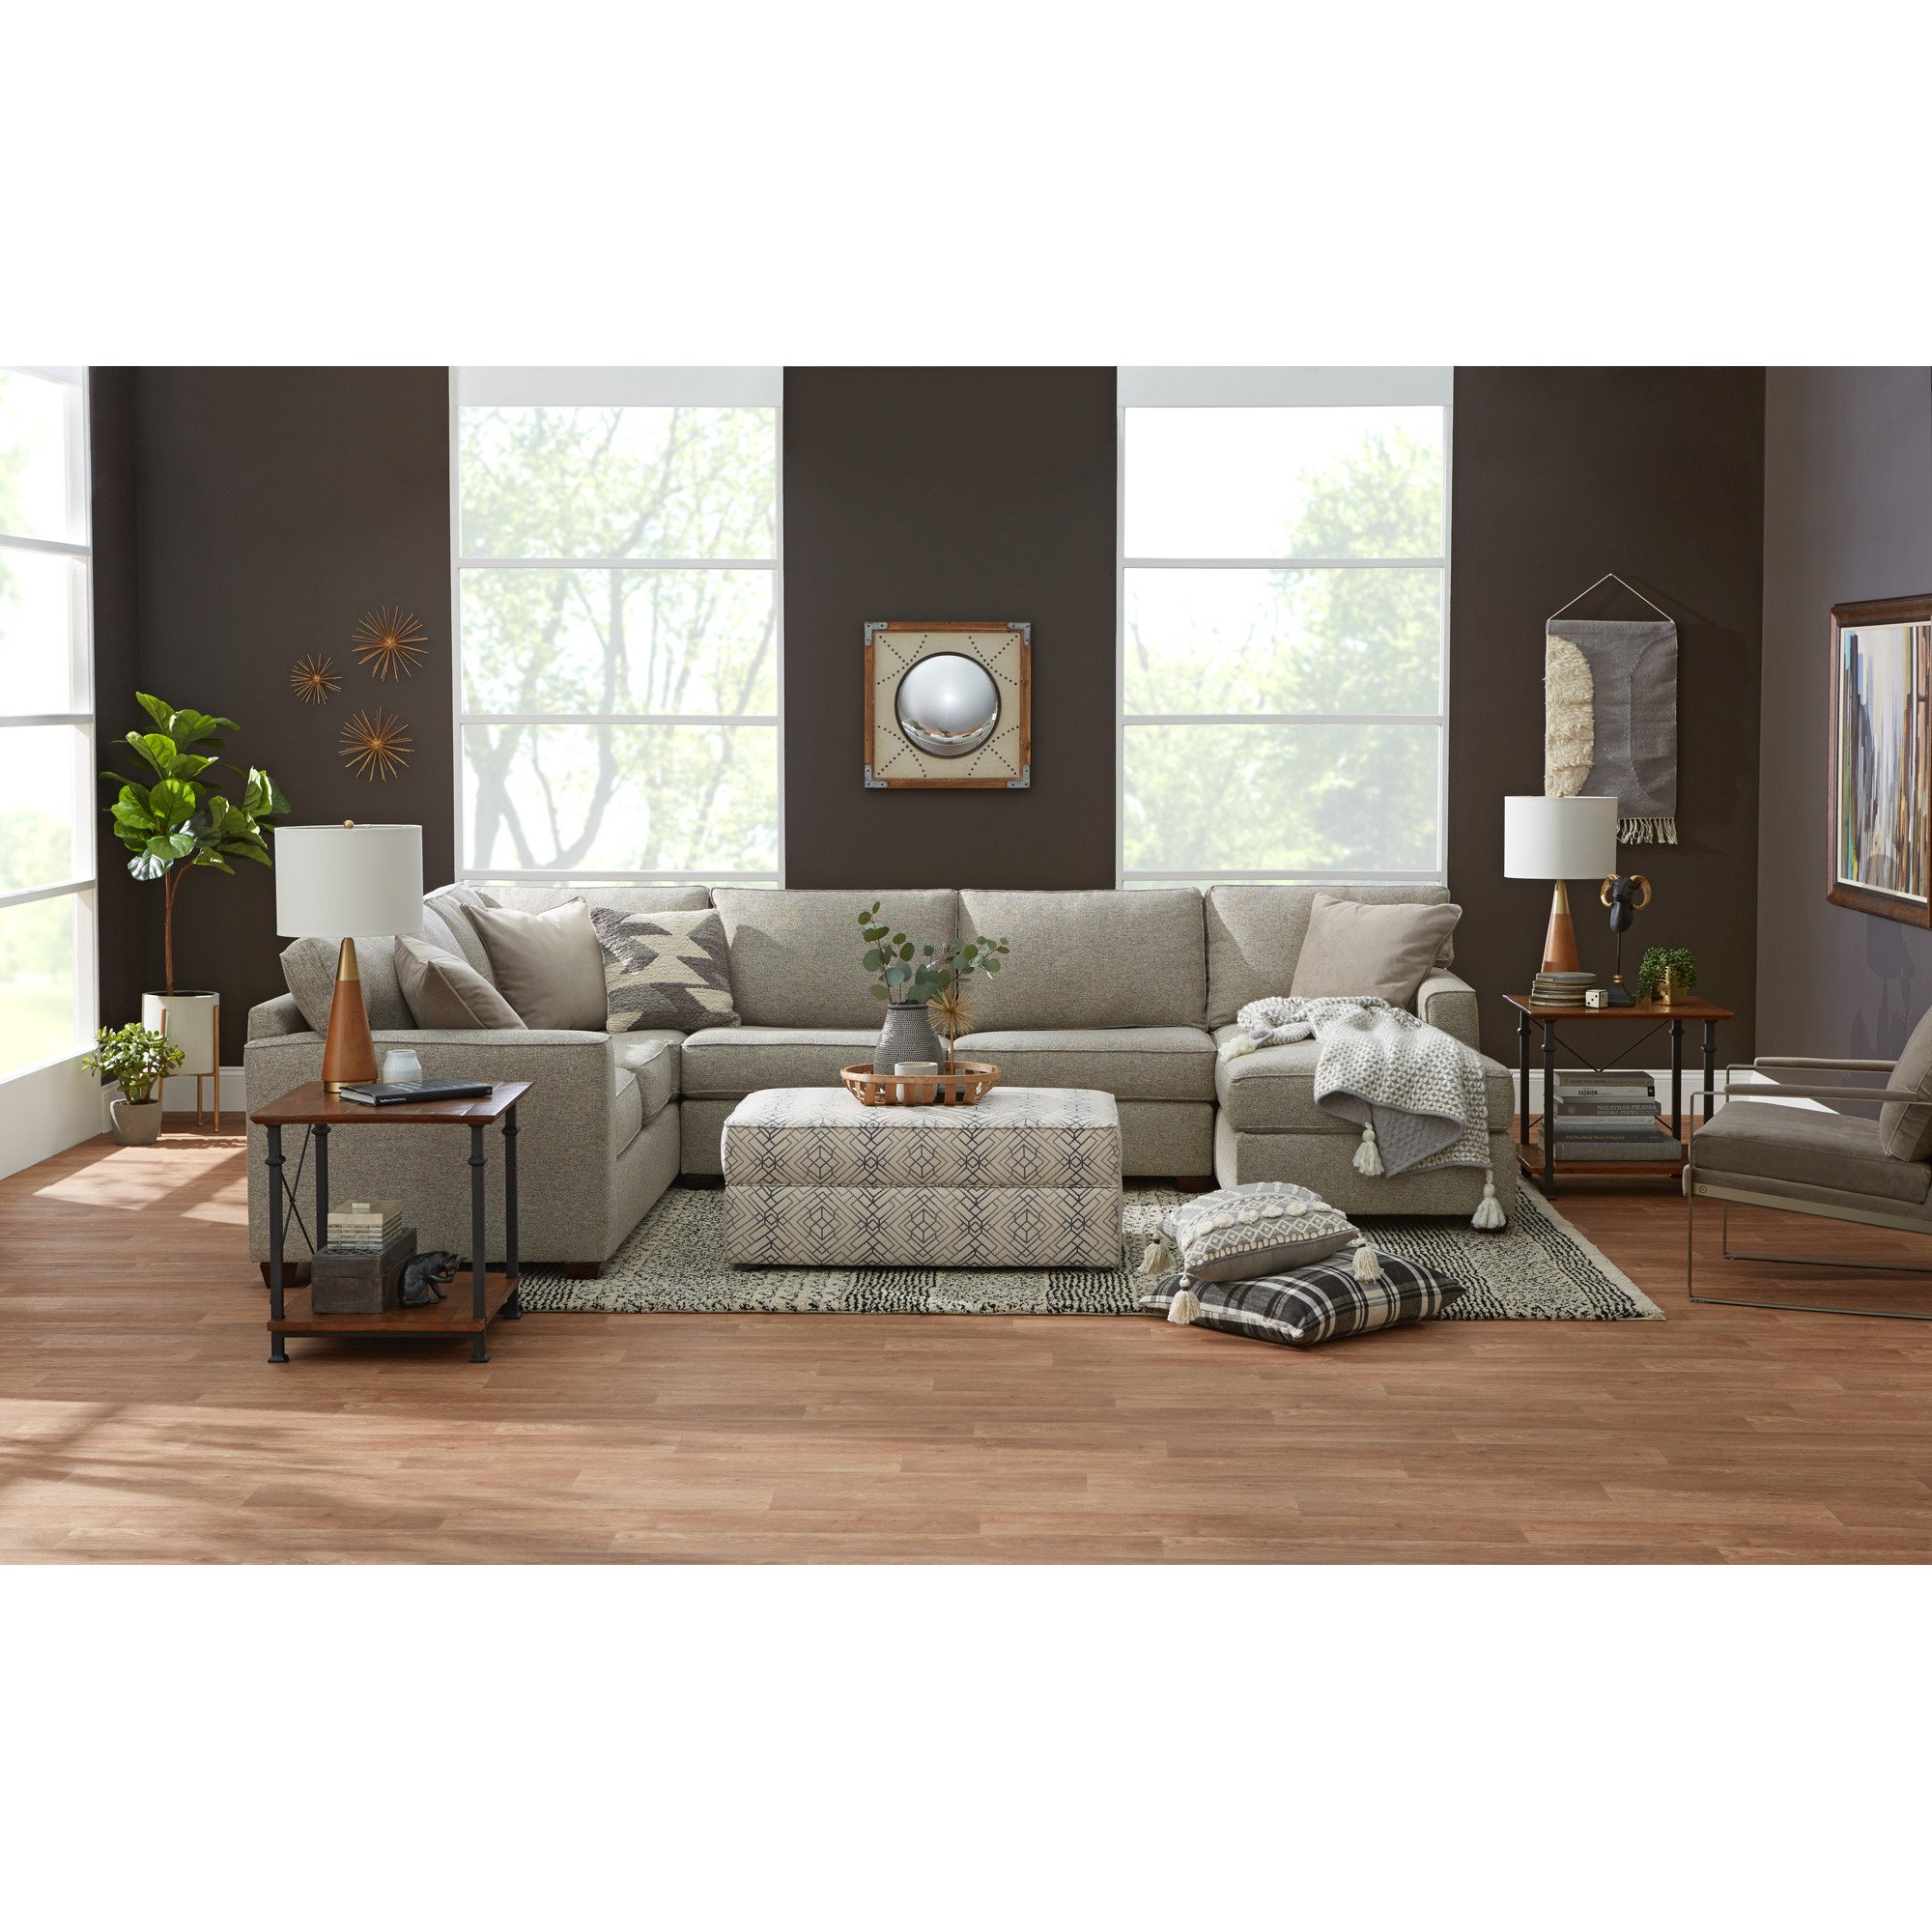 Bedroom Chairs for Sale Elegant Rise 3 Piece Right Sectional Living Rooms